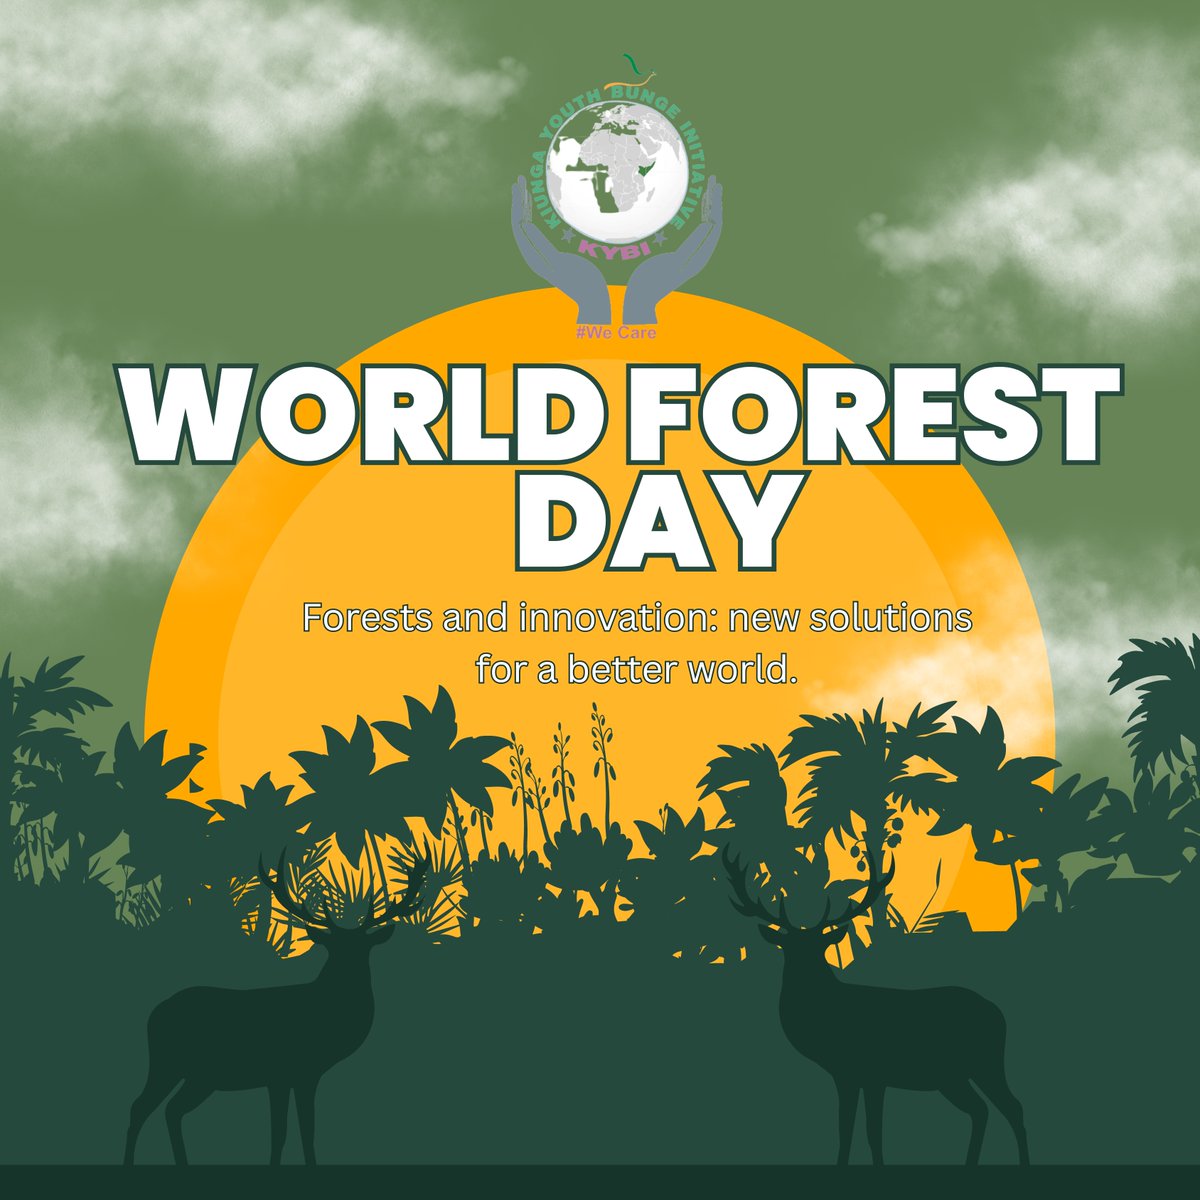 Happy World Forestry Day 2024.Let's celebrate the power of innovation in safeguarding our forests and shaping a brighter future for all. Together, let's explore new solutions for a greener, more sustainable world. #WorldForestryDay #innovationforforests